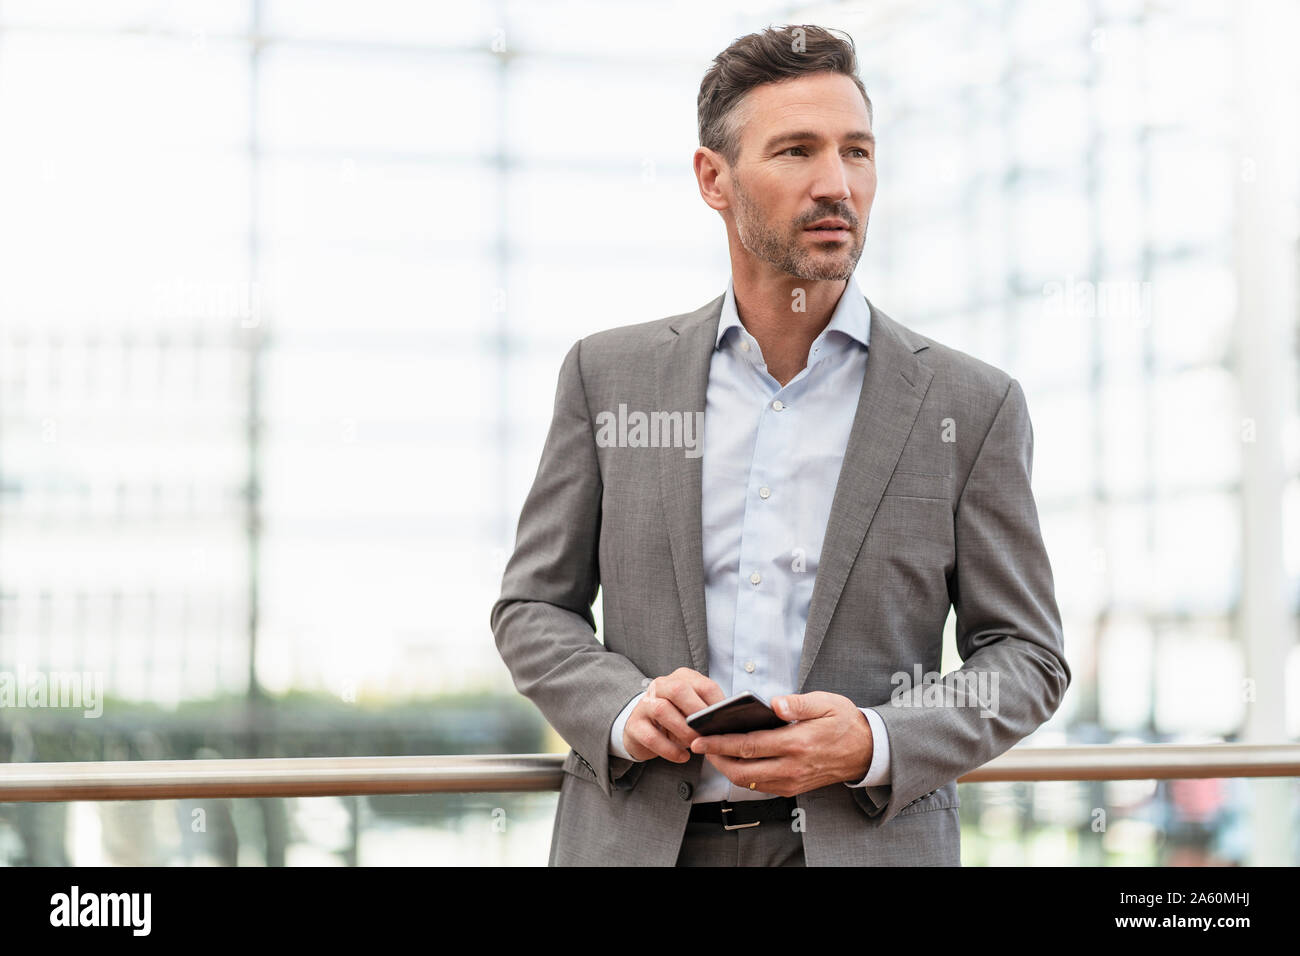 Portrait of businessman holding cell phone Stock Photo